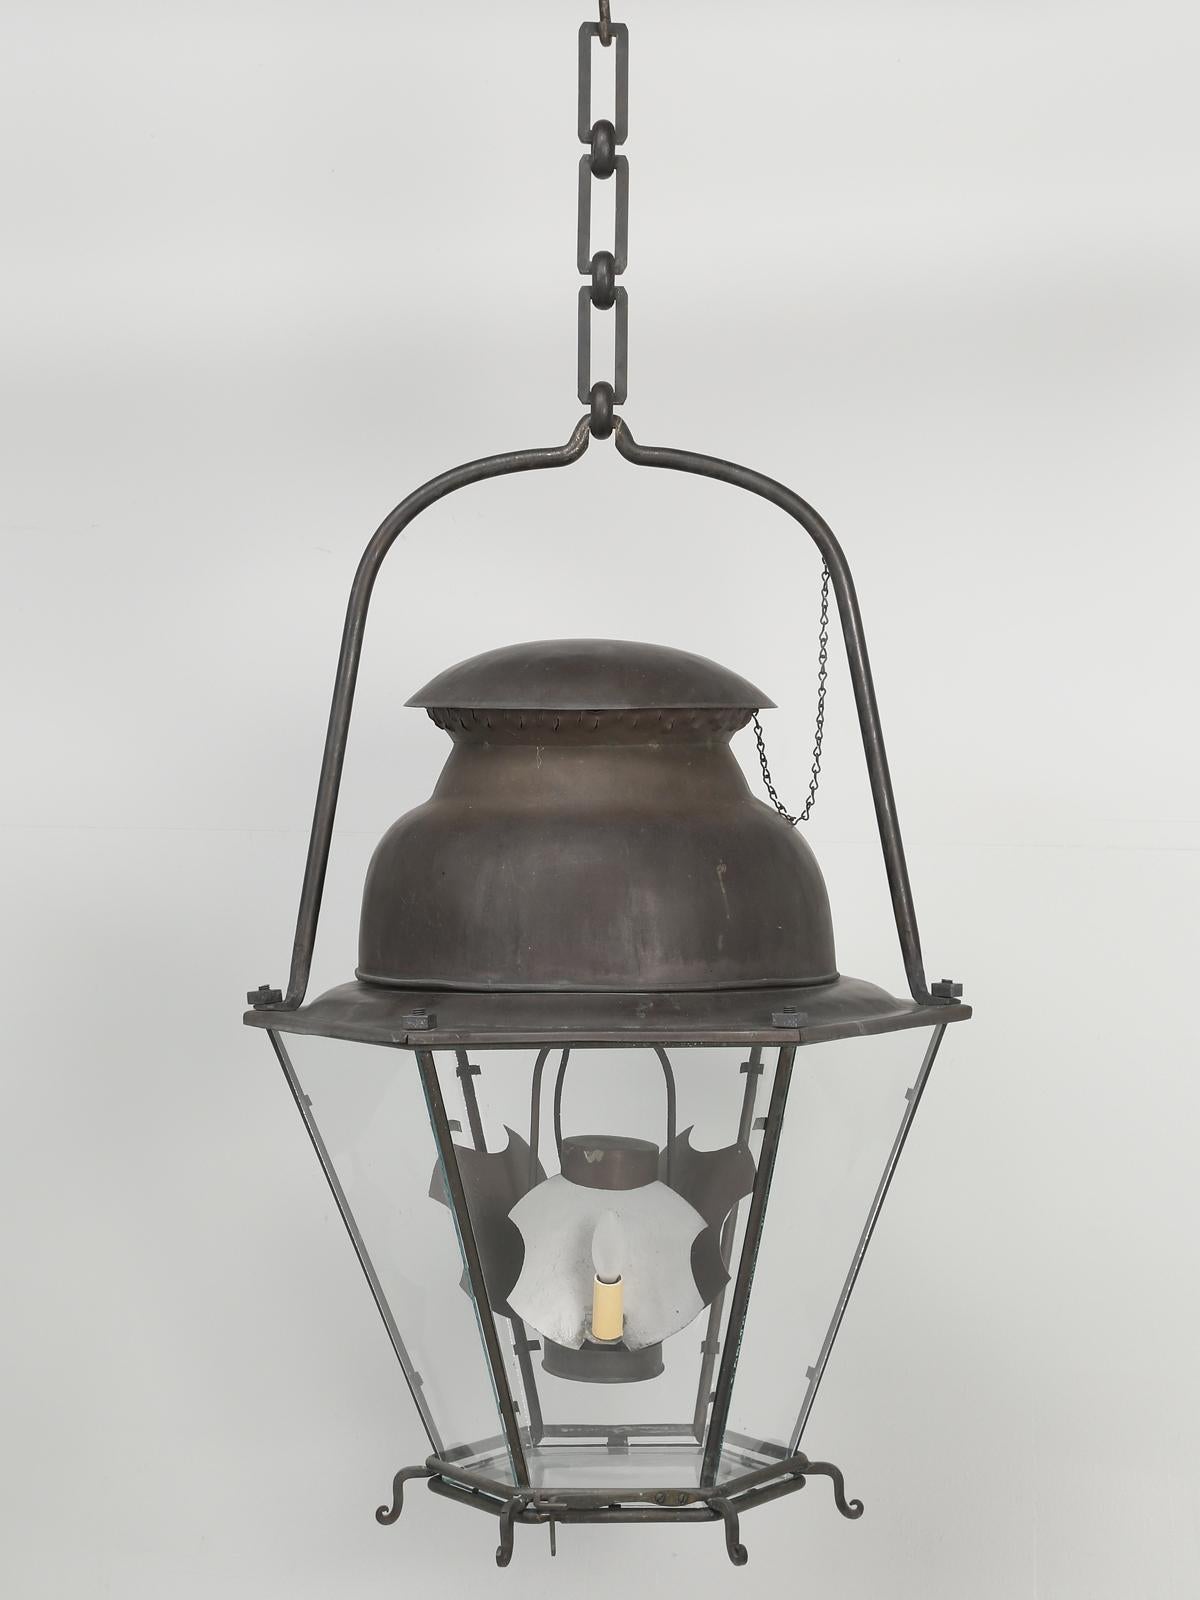 Country French 18th Century Style Copper Lanterns from the Original French Blueprints